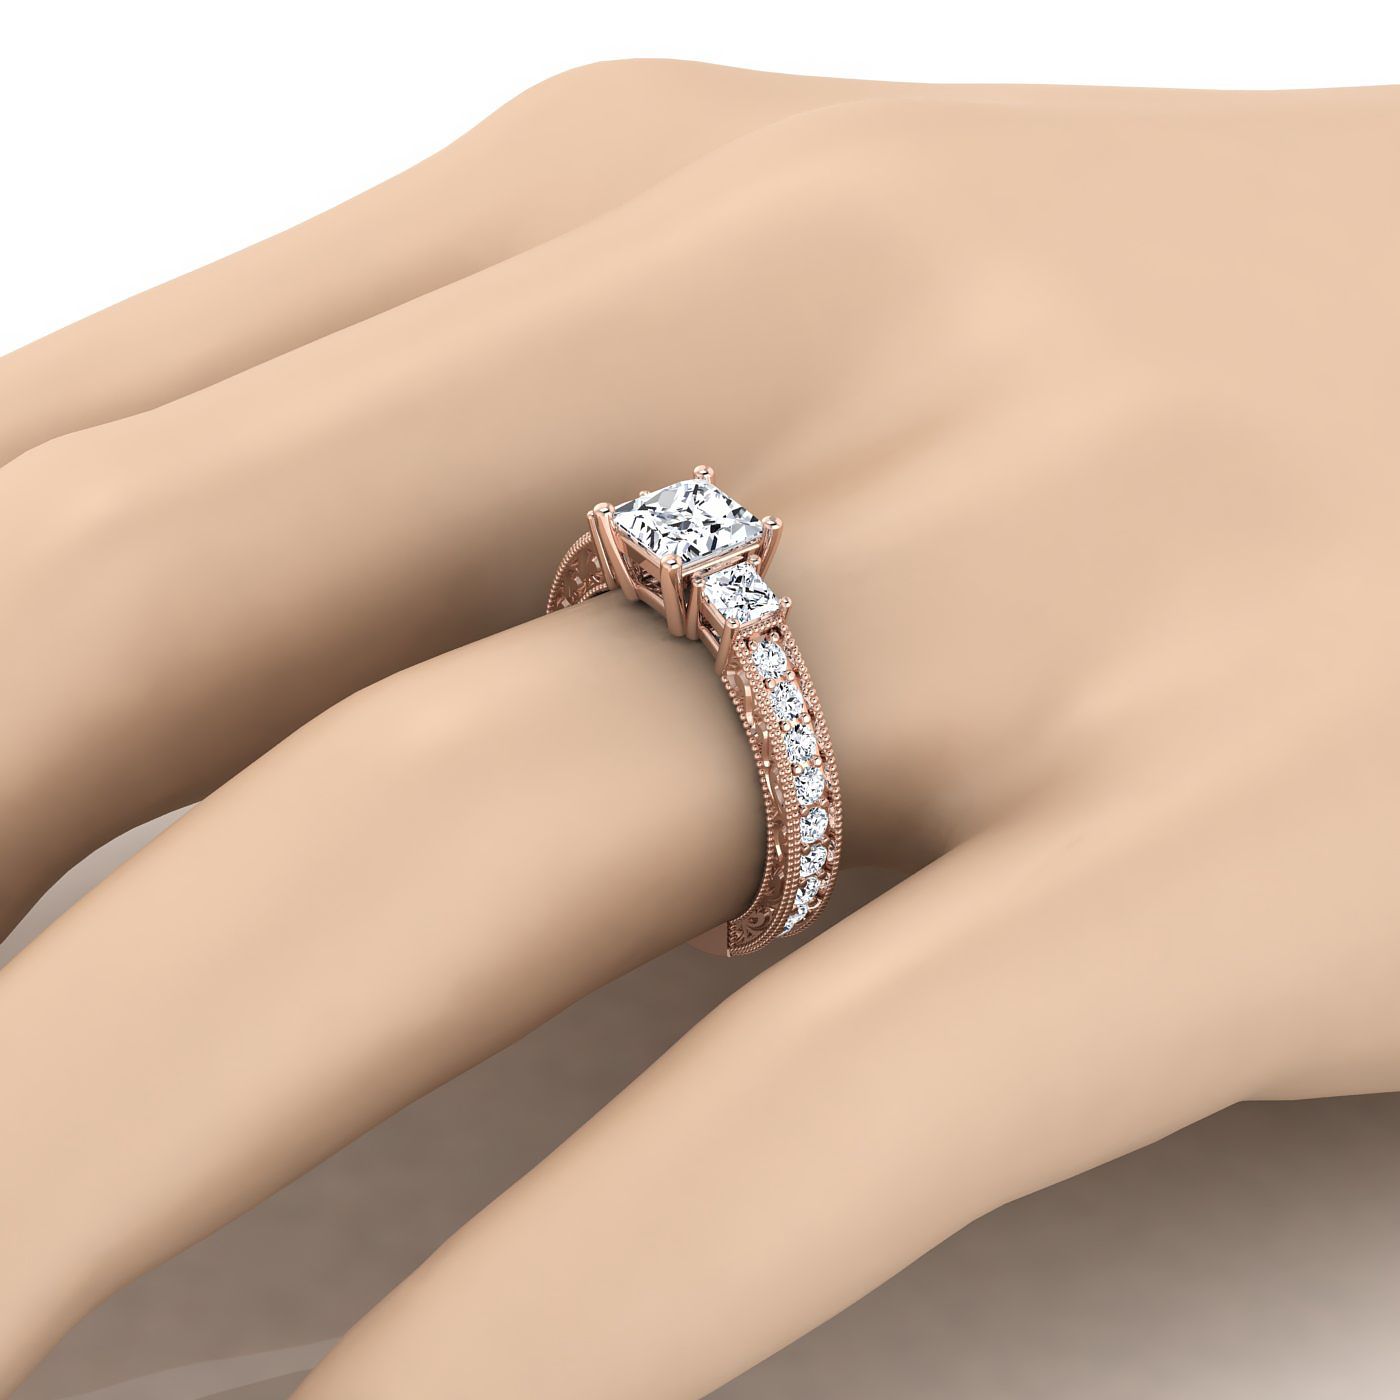 14K Rose Gold Princess Cut Diamond Hand Engraved Three Stone Vintage Channel Engagement Ring -3/4ctw